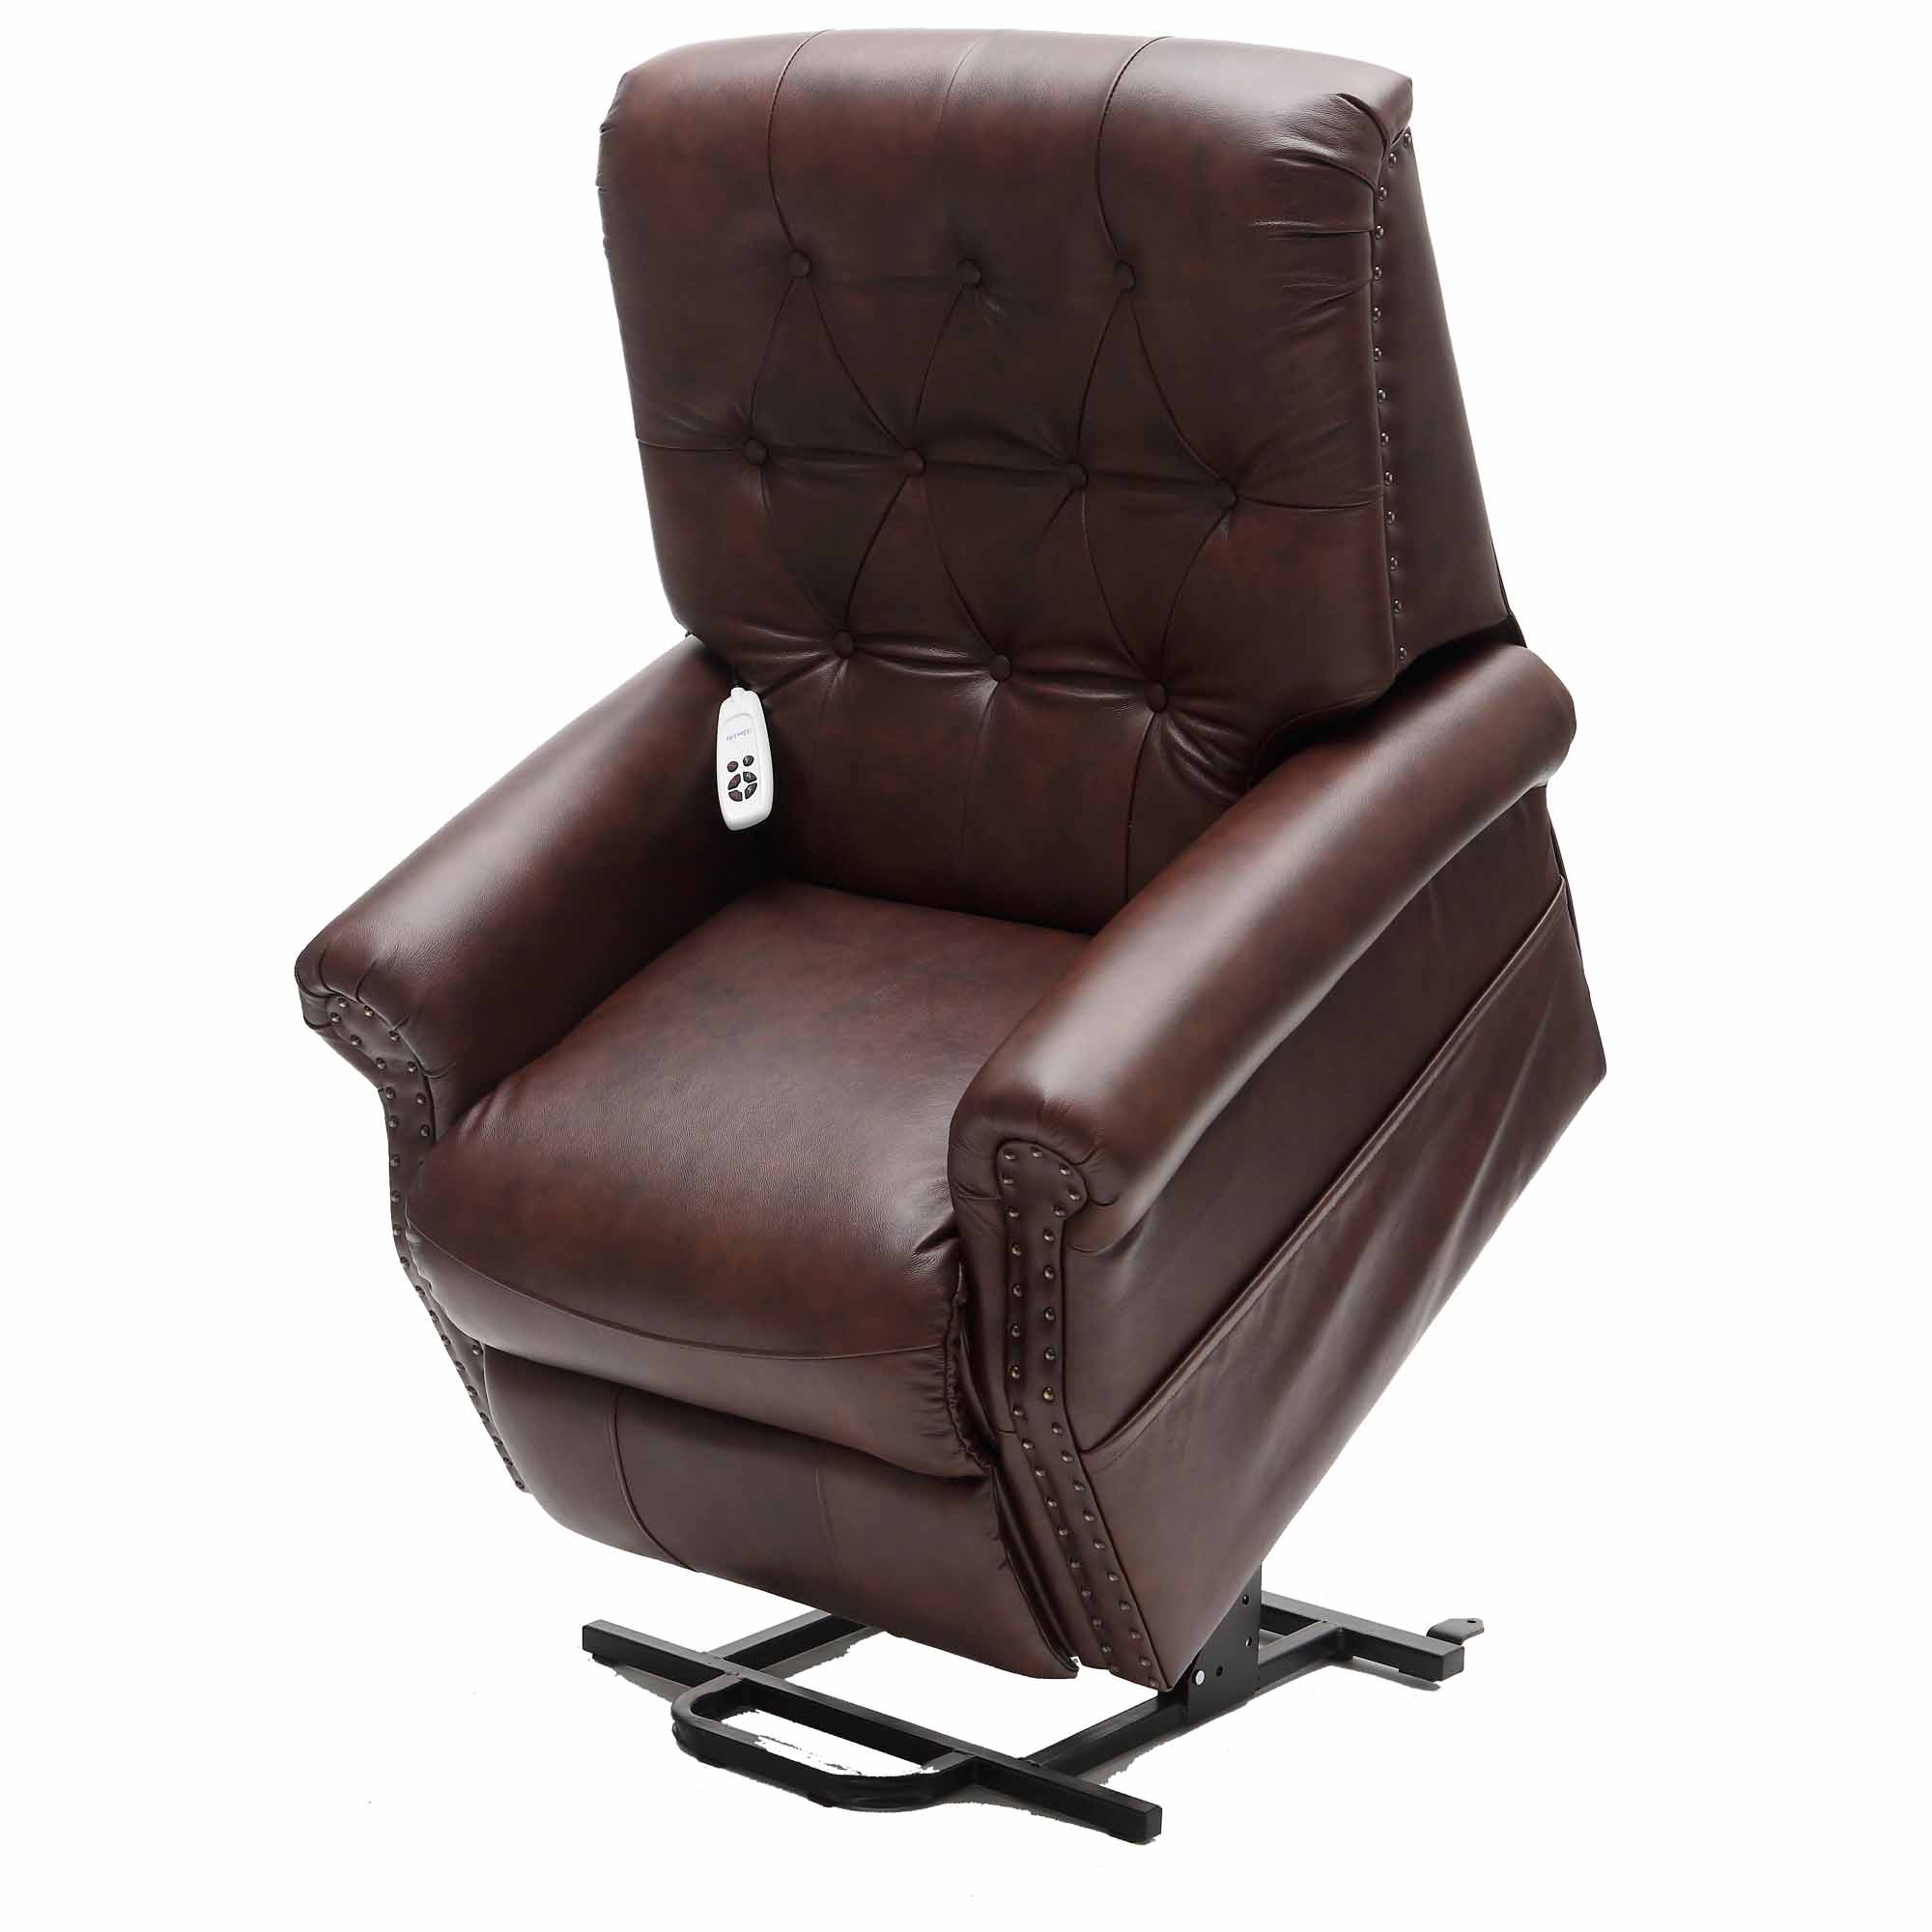 CH4017 Neptune Lift Chair Image